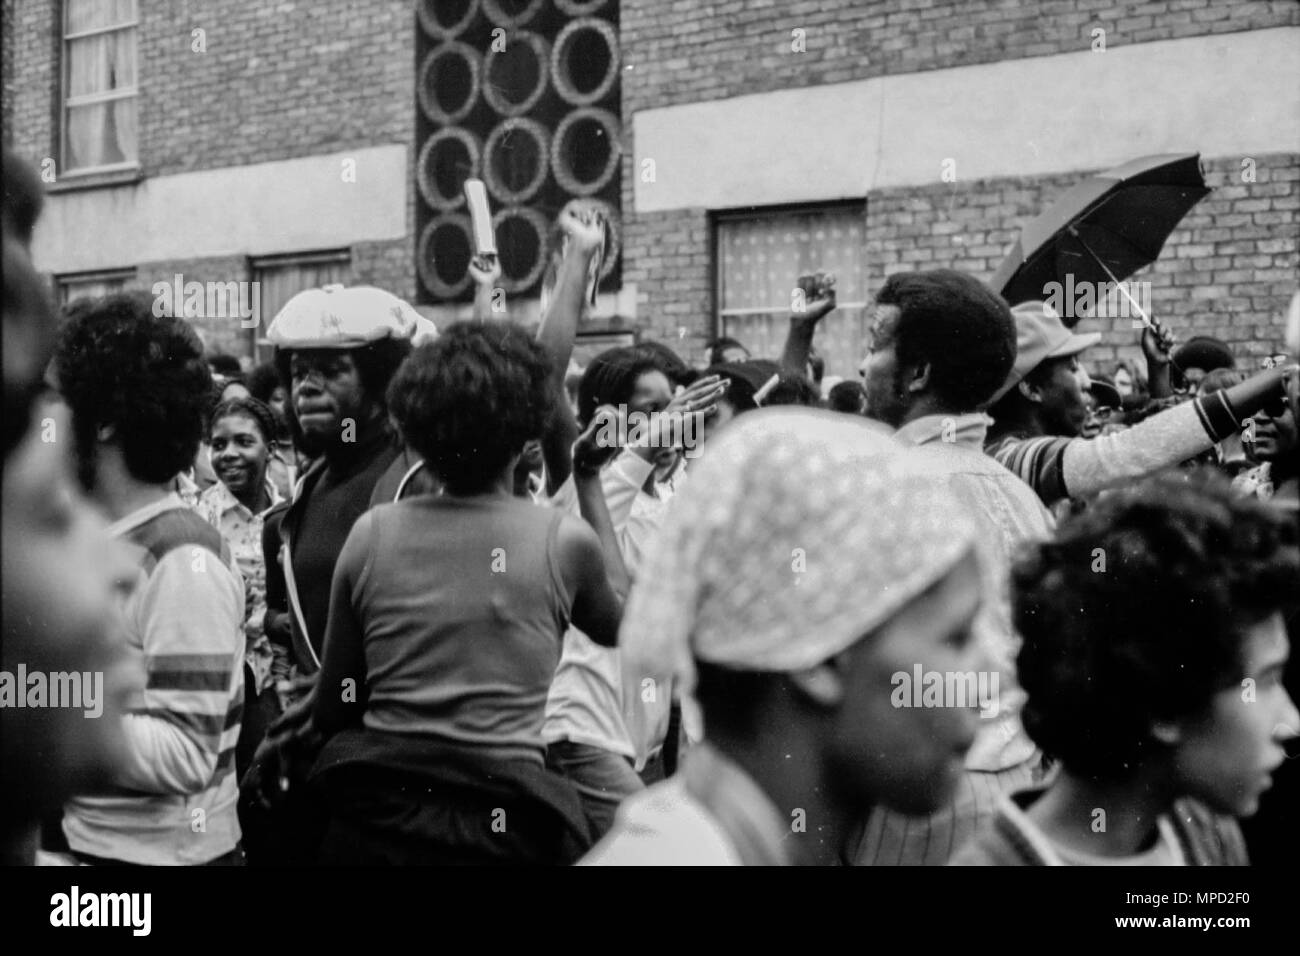 The Notting Hill Carnival in the streets of West London in 1976, the largest street festival in Europe. Great history of the Carnival images. Stock Photo